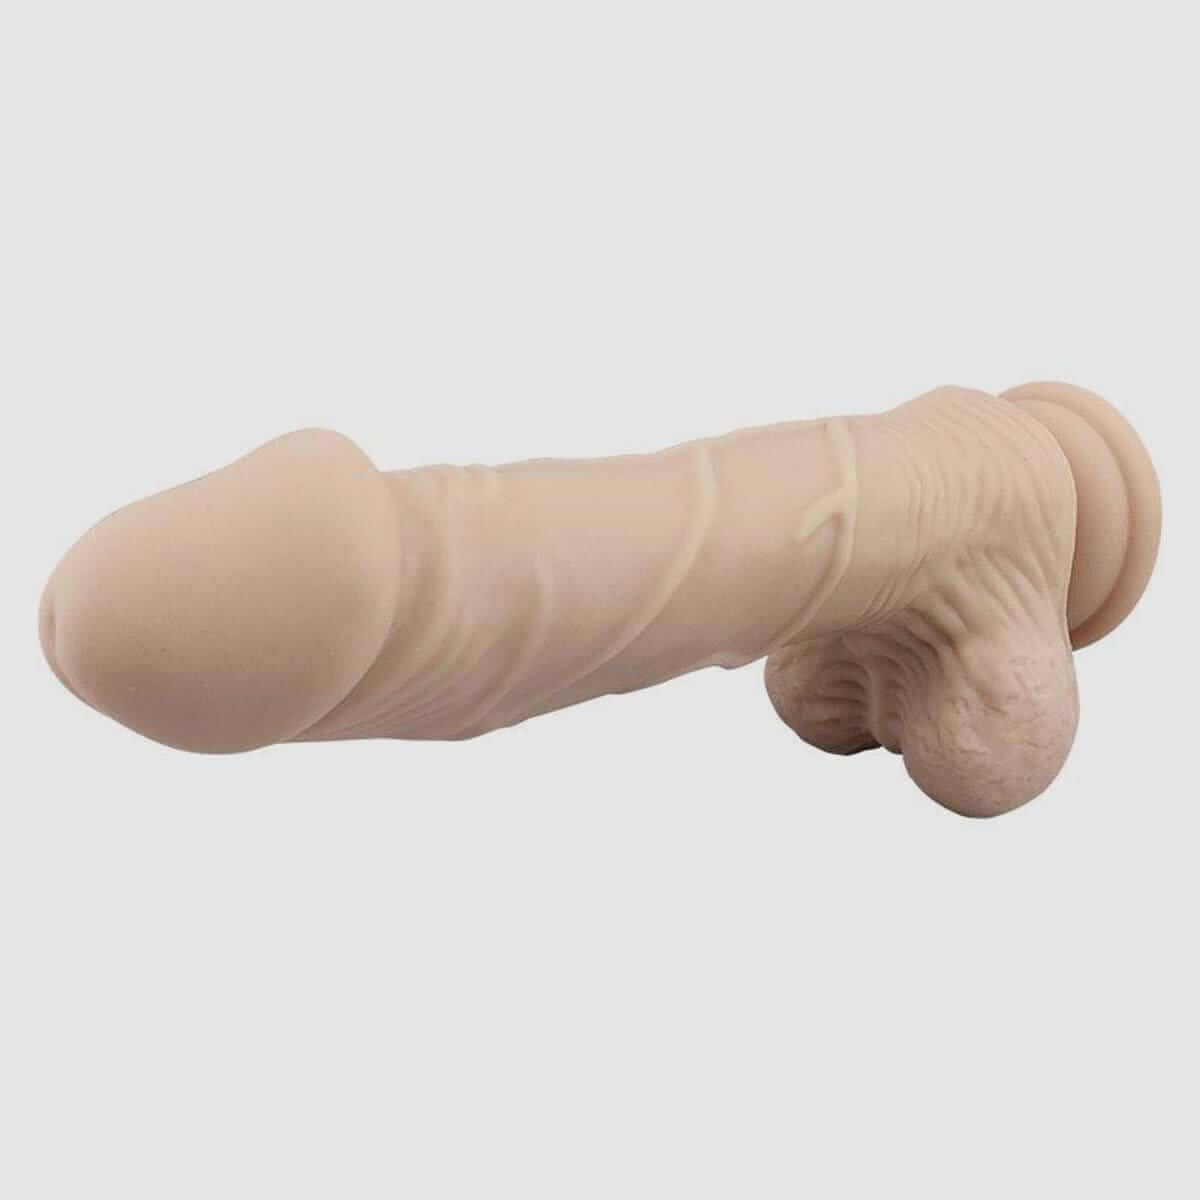 T&F knight HAPPINESS FILLER Dildo - 8" - Thorn & Feather Sex Toy Canada